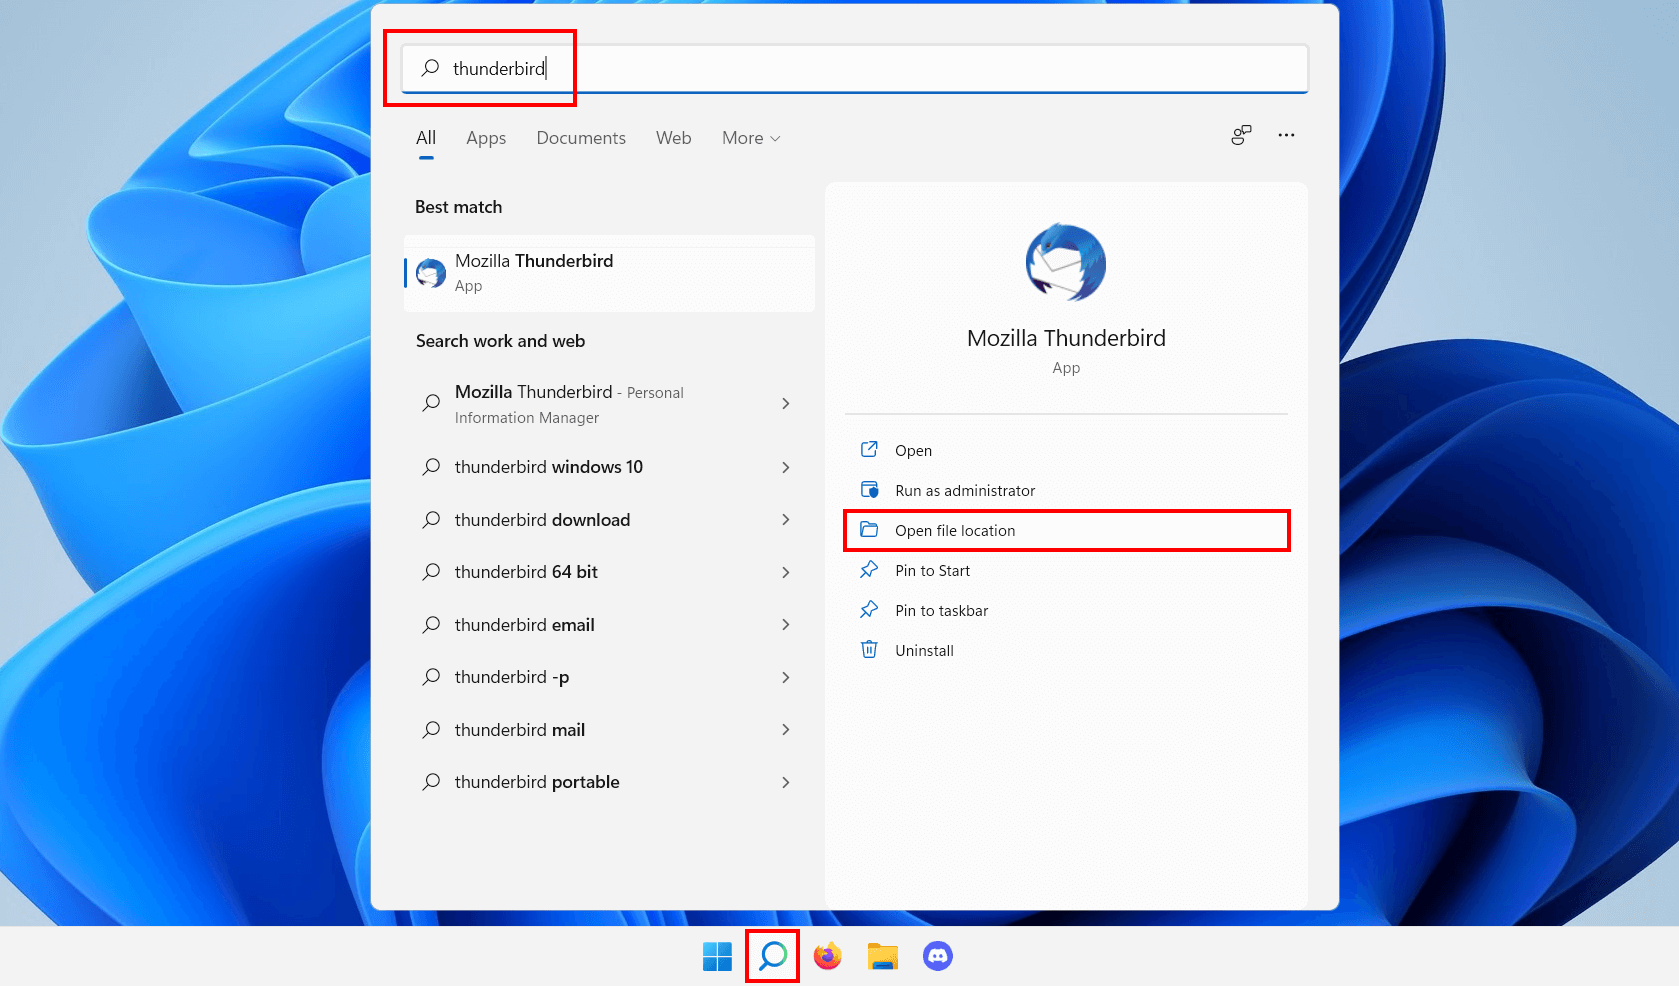 Windows 11: search for applications